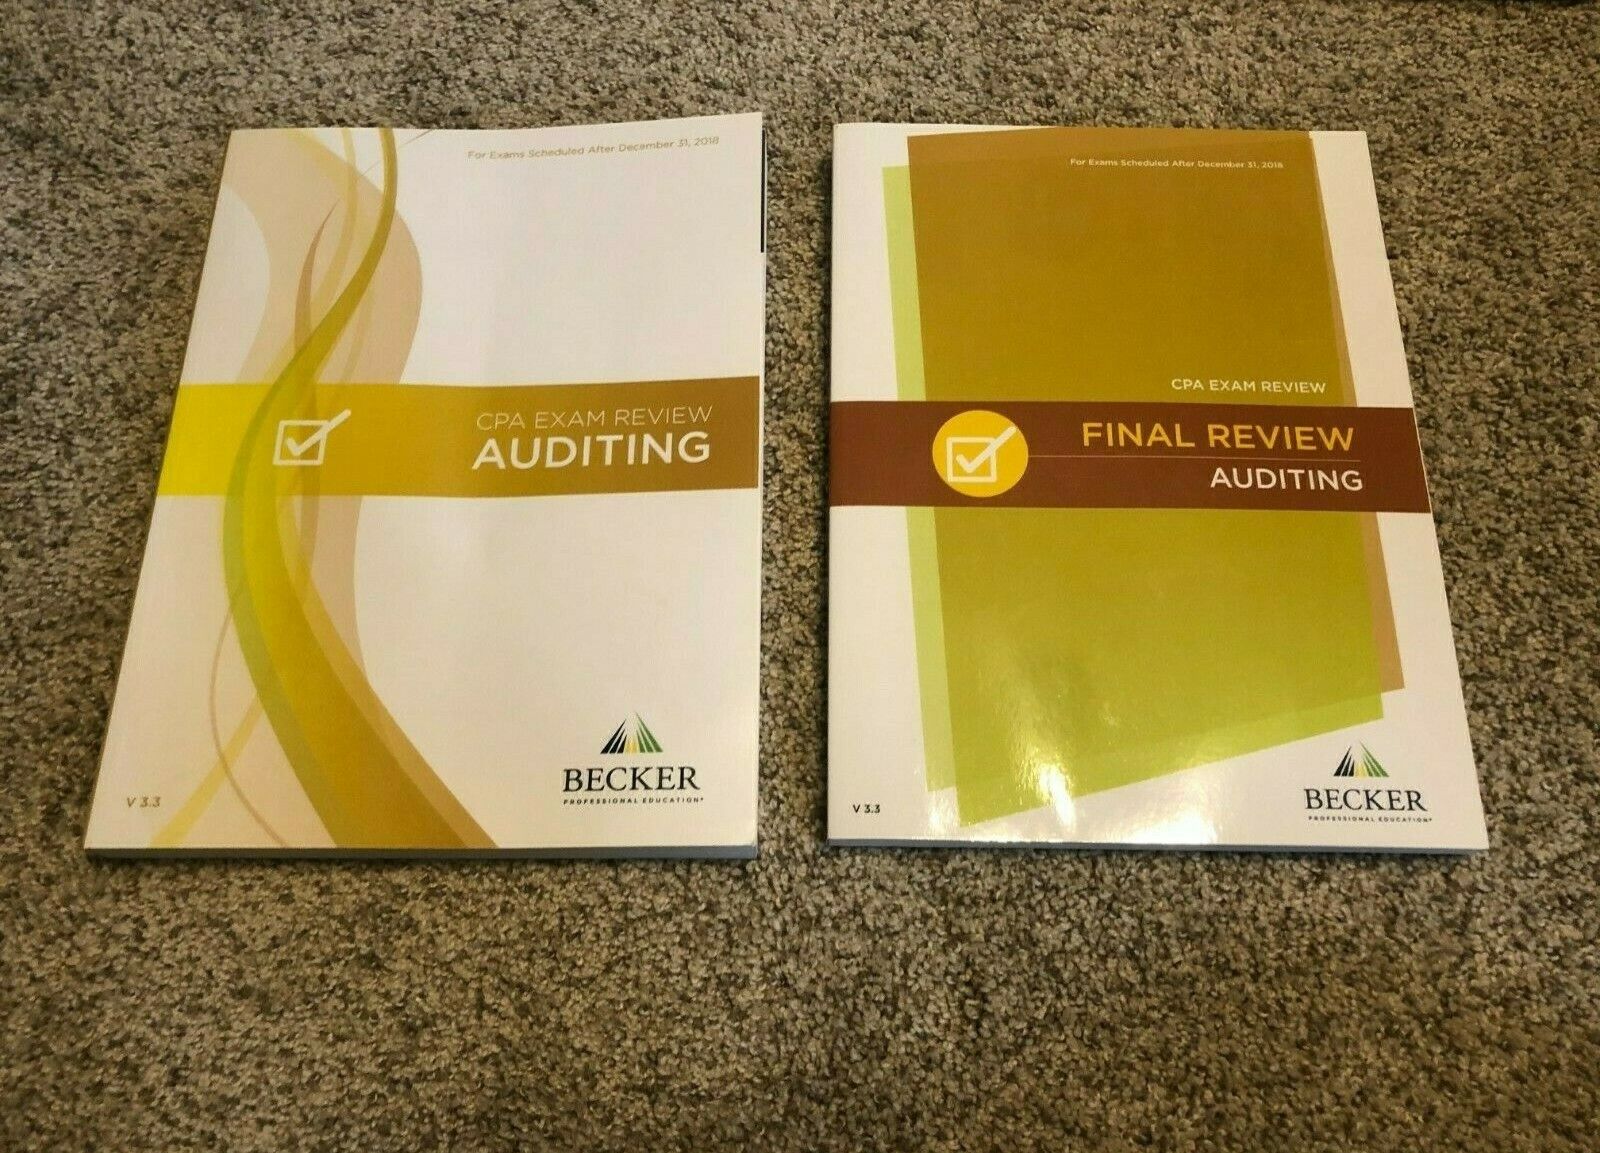 Becker Cpa Review And Final Review Books 3.3 Audit, Excellent Condition